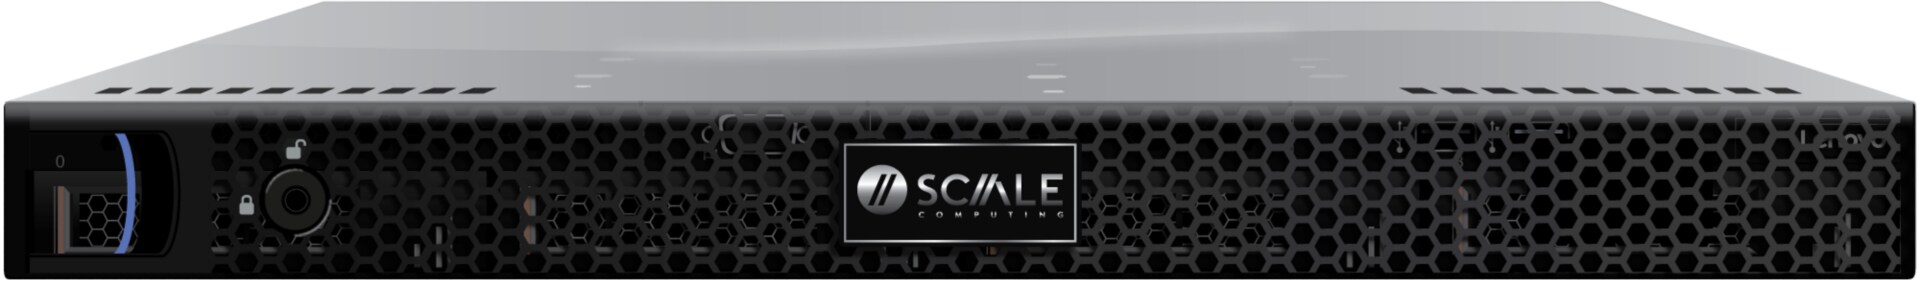 Scale Computing HC1300 Chassis